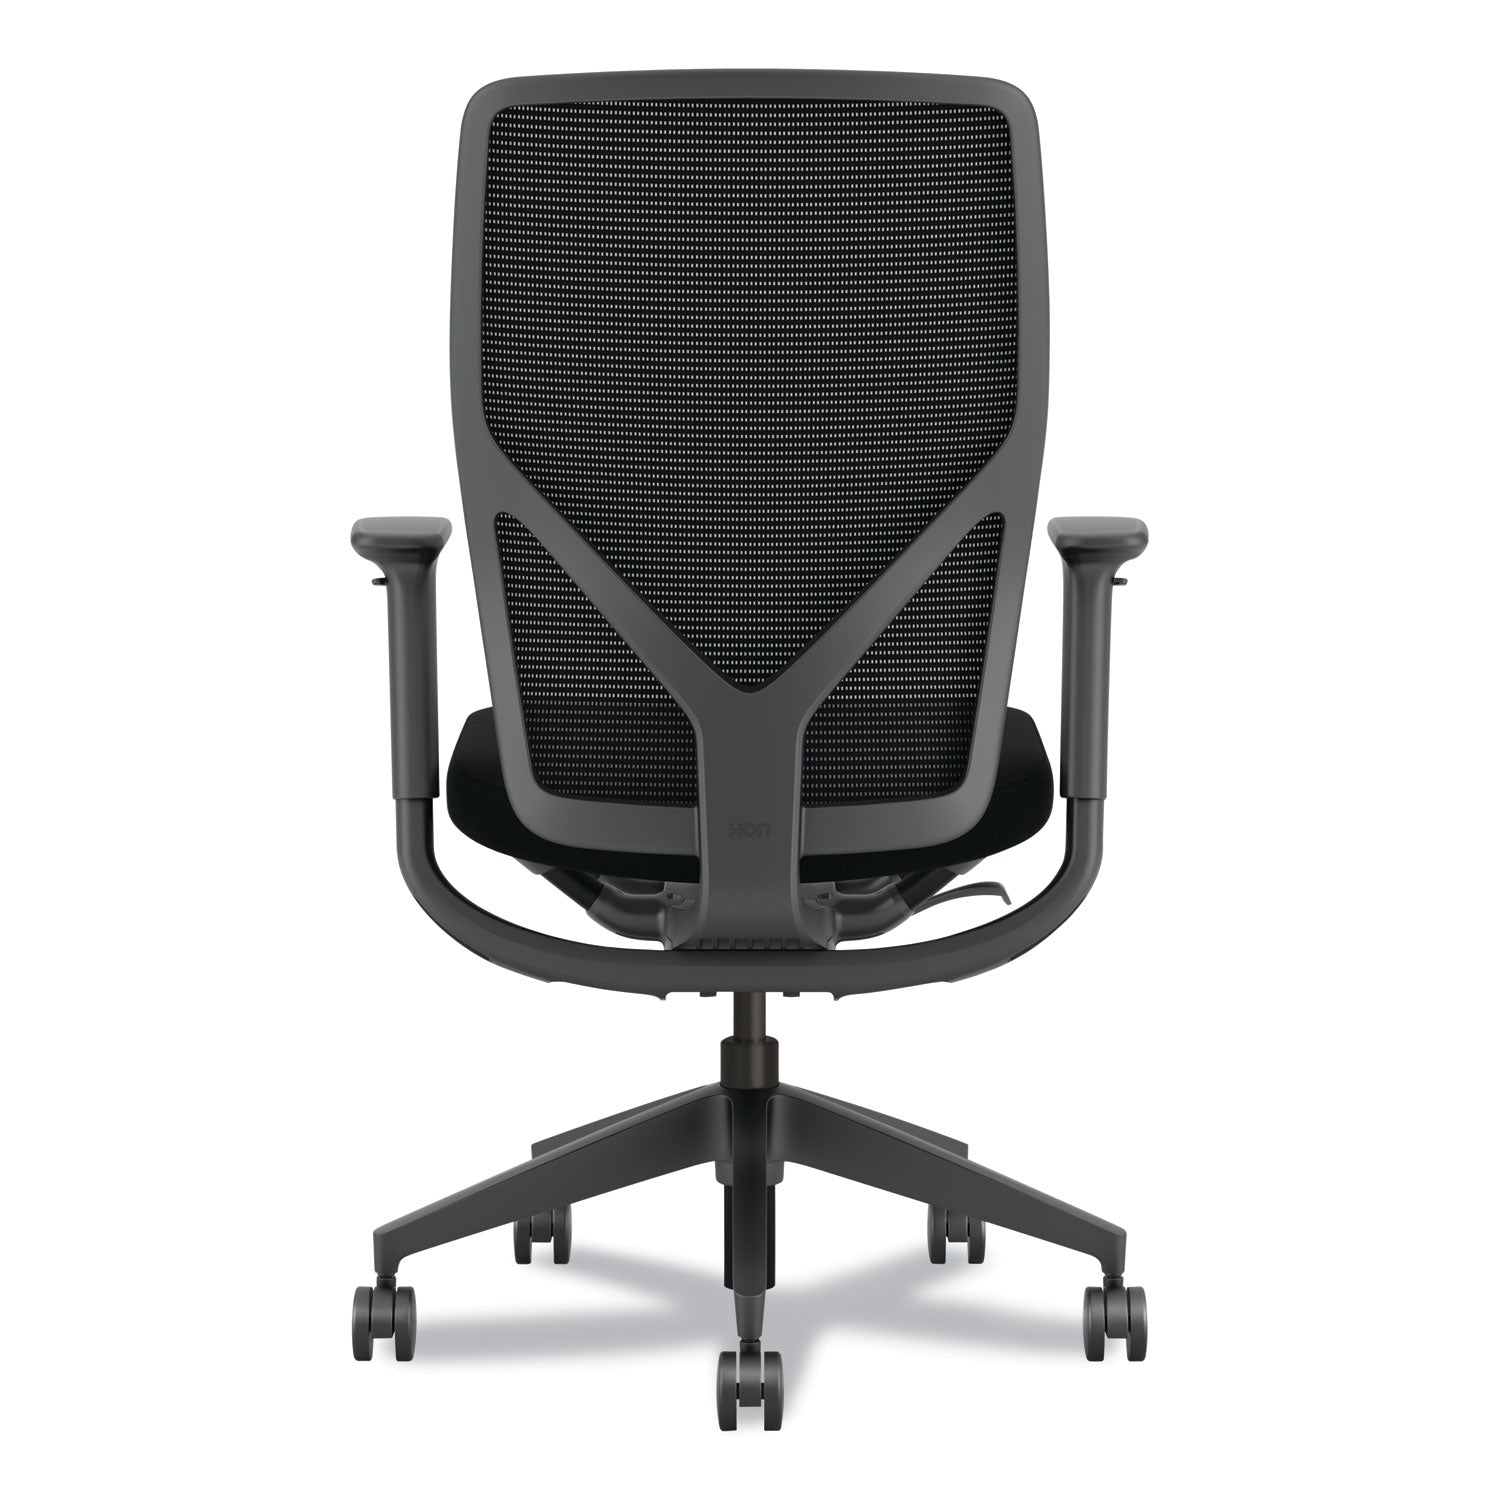 Flexion Mesh Back Task Chair, Supports Up to 300lb, 14.81" to 19.7" Seat Height, Black Seat/Back/Base - 2